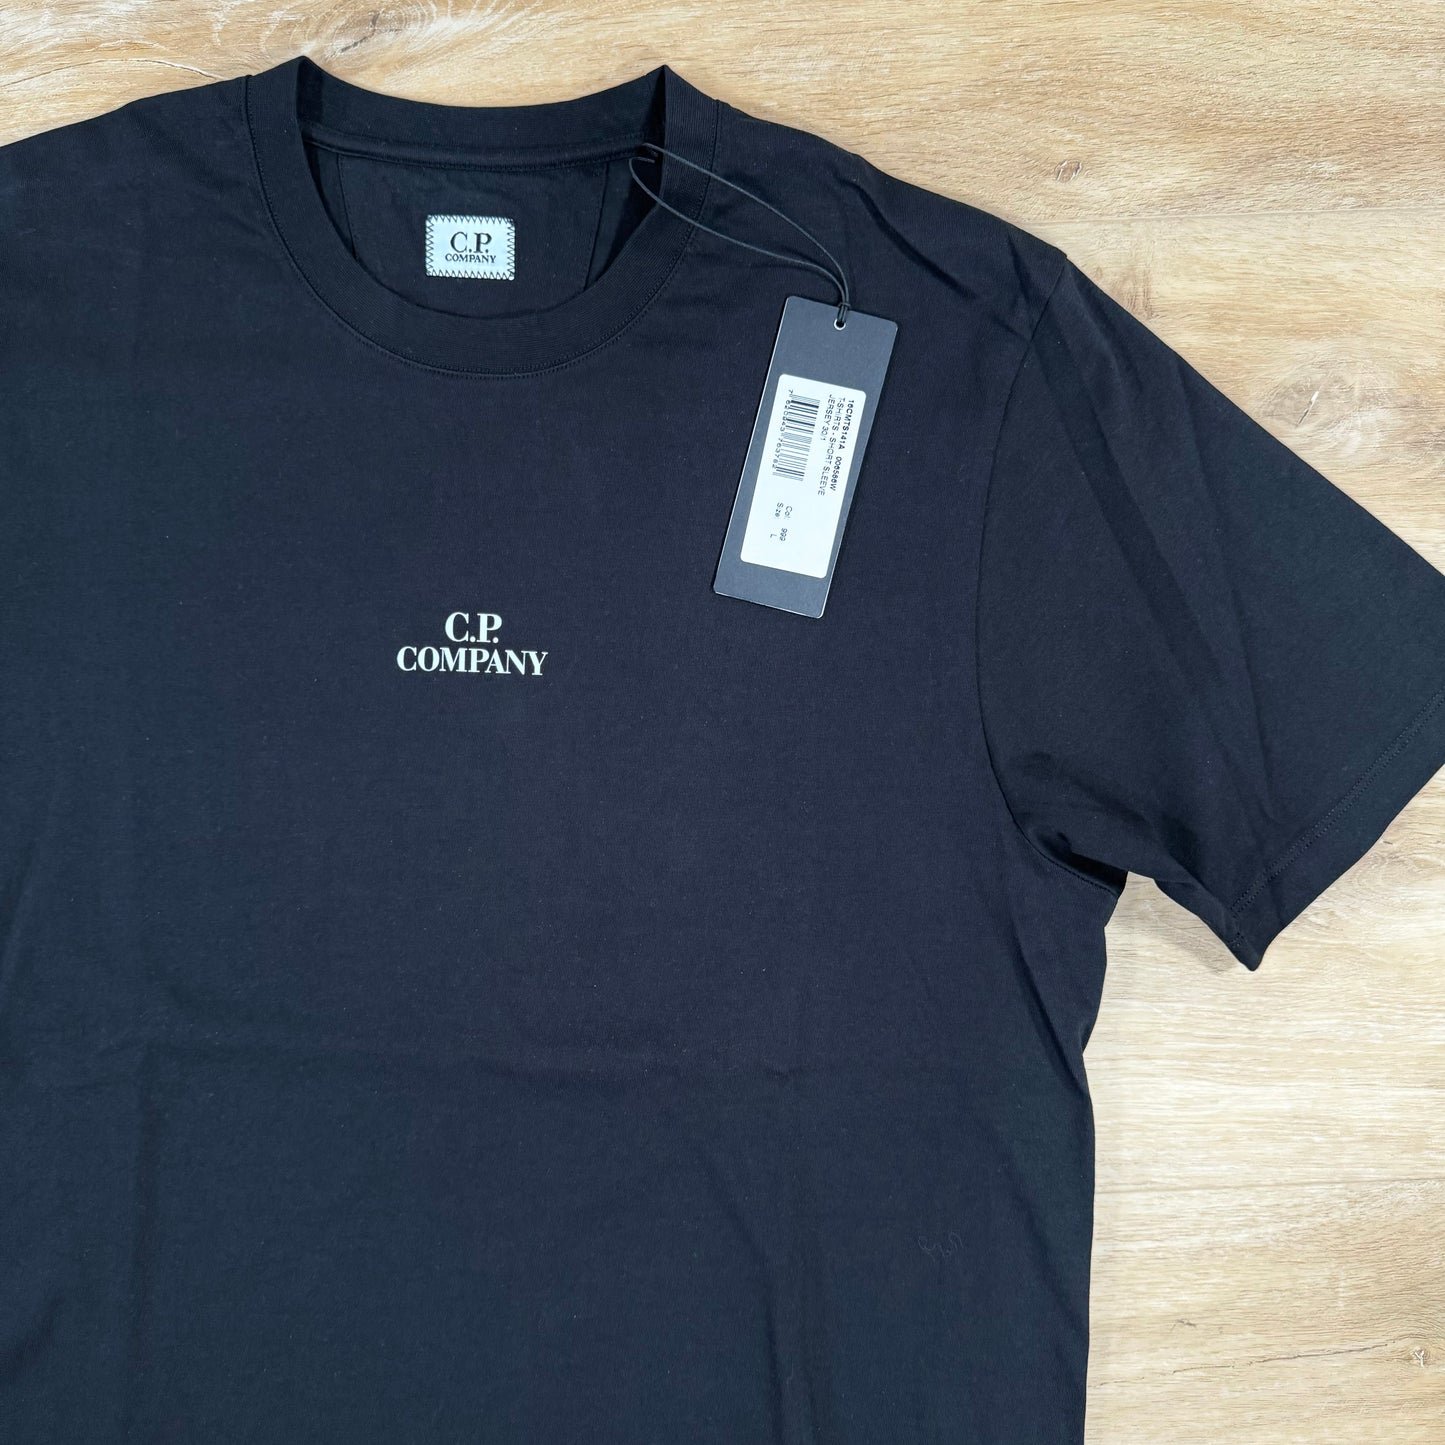 C.P. Company 30/1 Jersey Graphic T-Shirt in Black